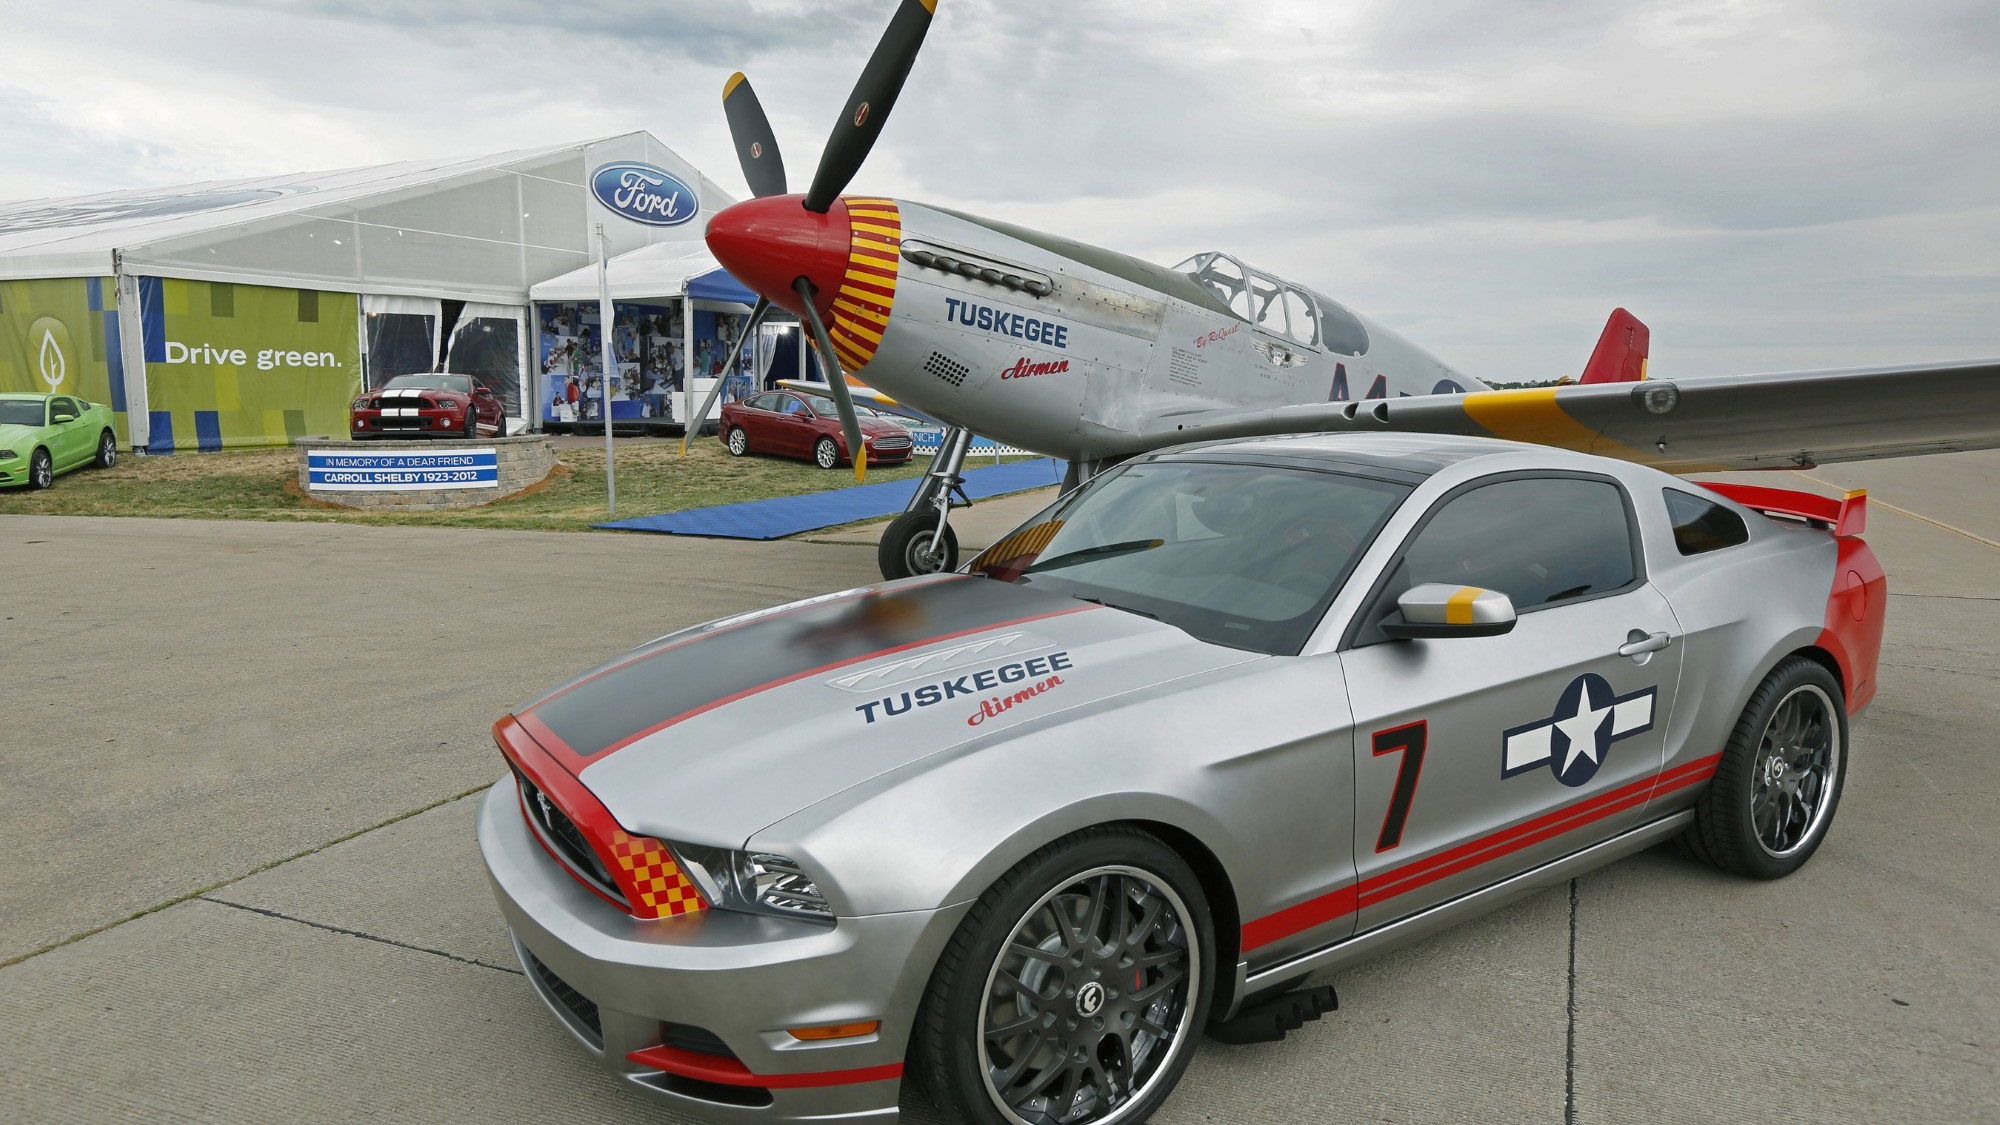 2013 Ford Mustang GT Red Tails Edition